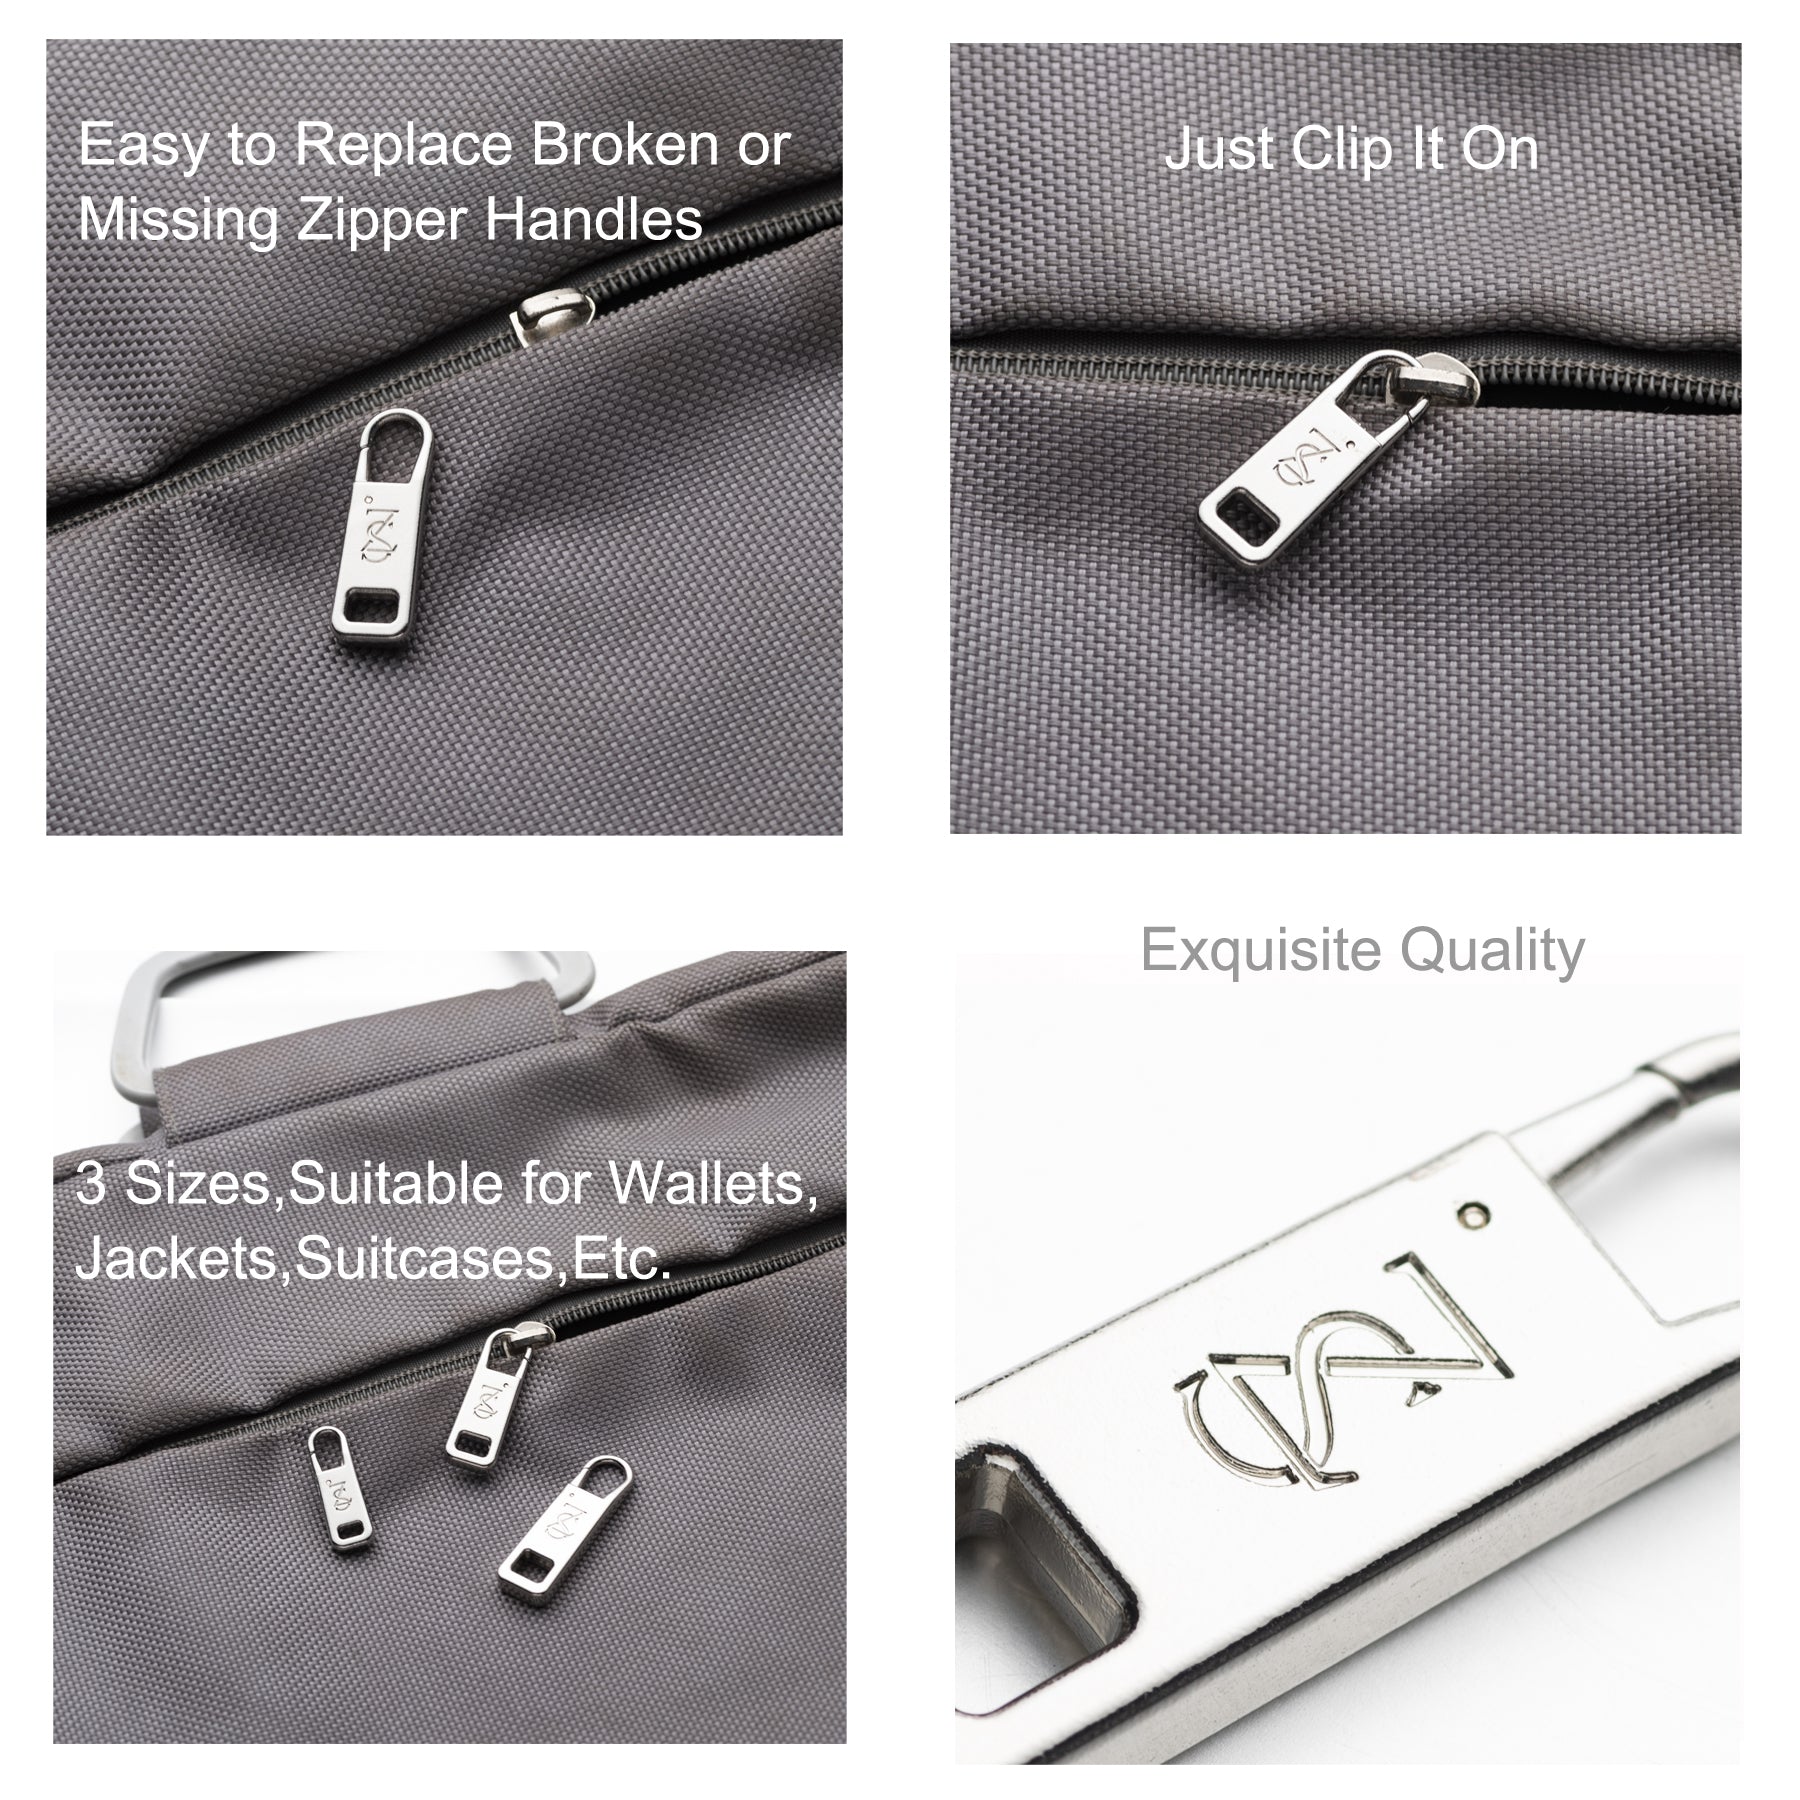 3 Size Luggage Zipper Pulls Replacement - Easy Repair for Broken and Missing Zipper Pulls